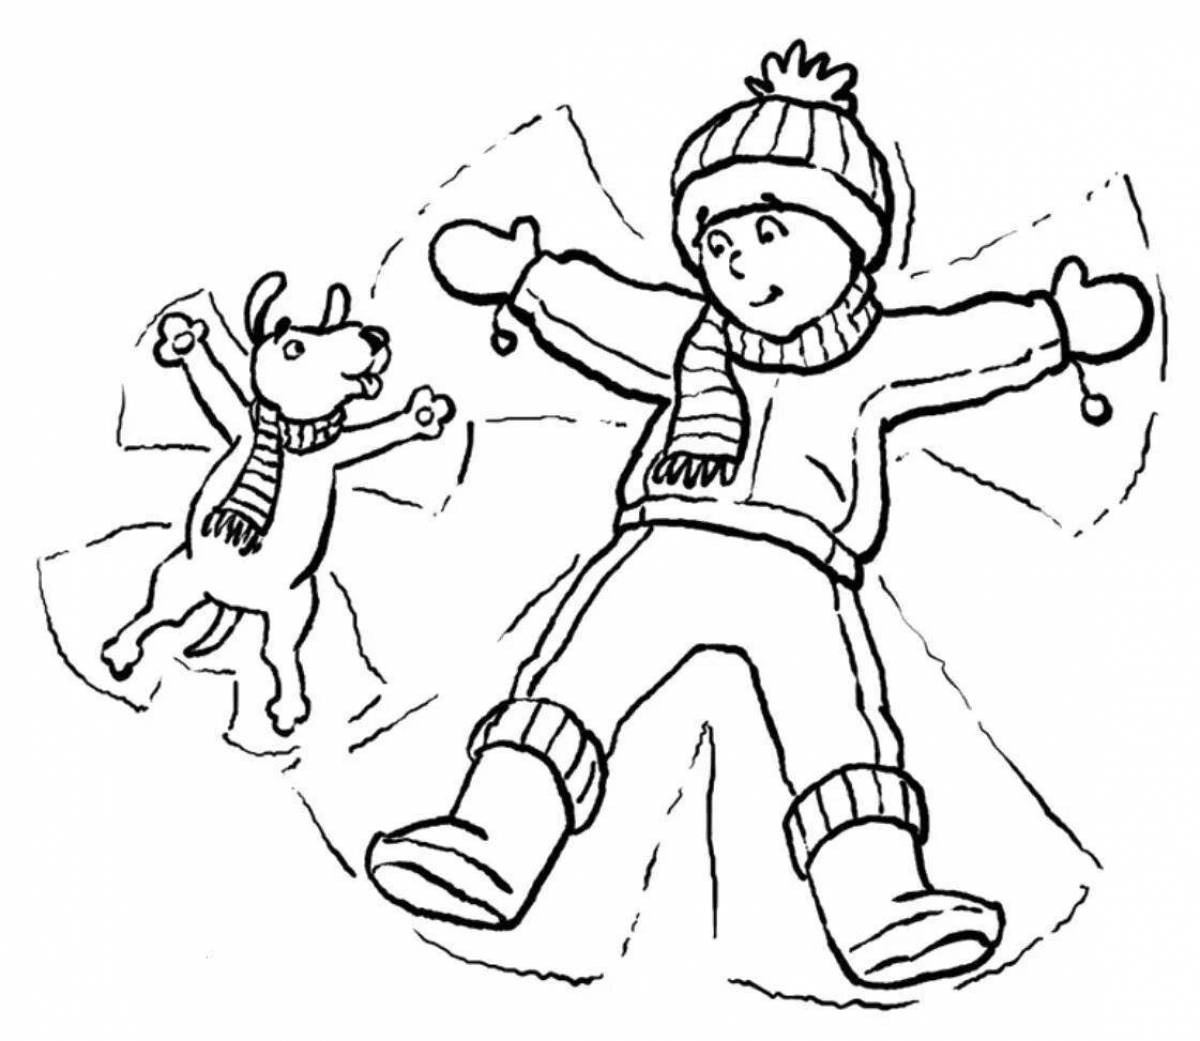 Color-frenzy snowball game coloring page